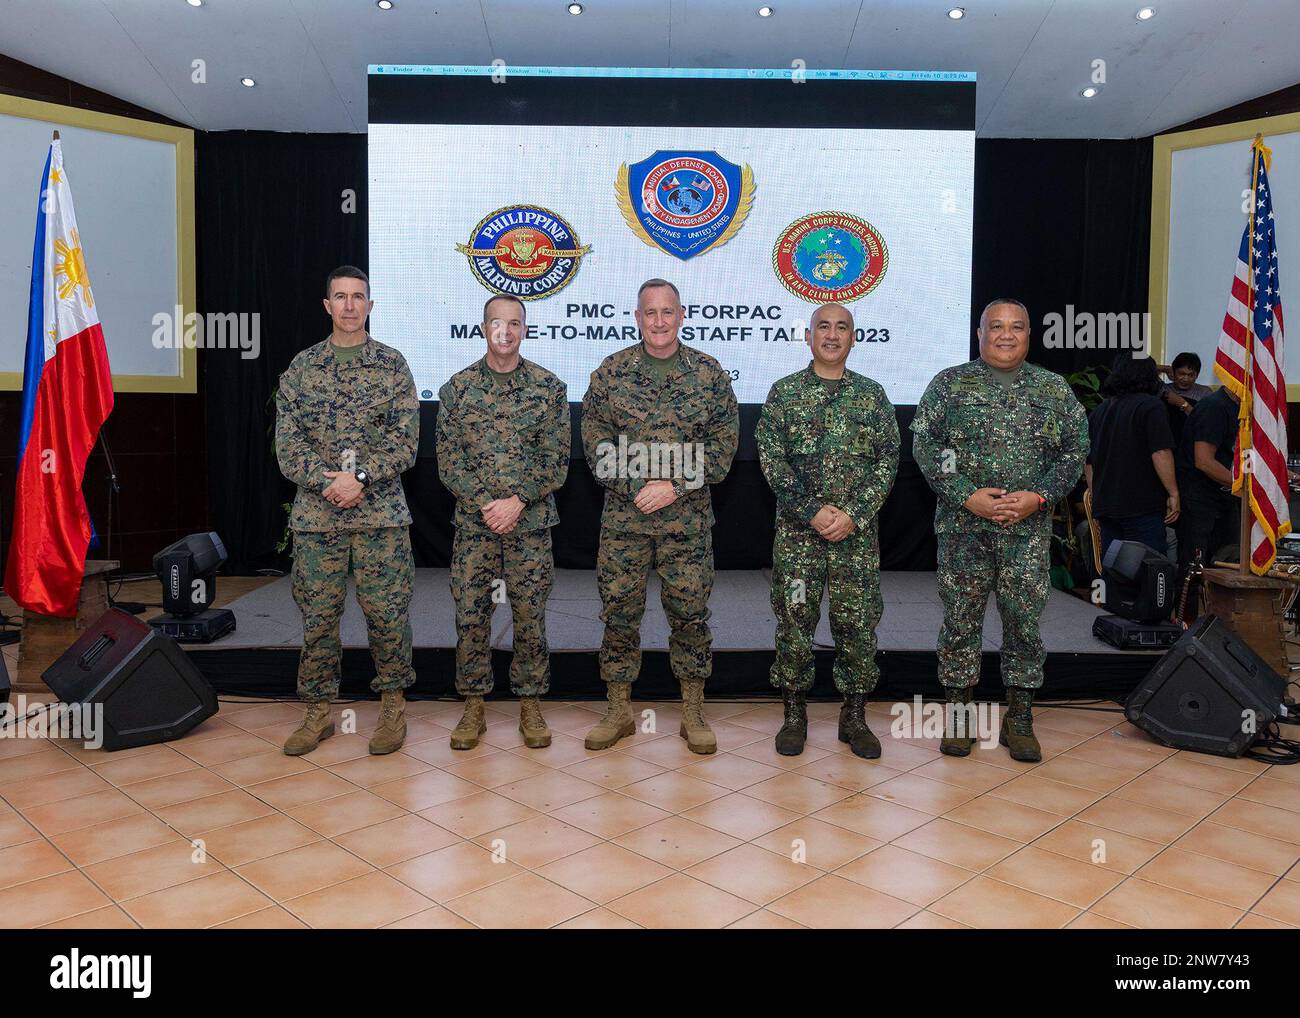 From left to right, U.S. Marine Corps Maj. Gen. Benjamin T. Watson, left, commander, 1st Marine Division, Maj. Gen. Jay M. Bargeron, commander, 3d Marine Division, Lt. Gen. William M. Jurney, commander, U.S. Marine Corps Forces, Pacific (MARFORPAC), Philippine Marine Corps Maj. Gen. Charlton Sean M. Gaerlan, commandant, Philippine Marine Corps (PMC), and Brig. Gen. Jimmy D. Larida, commander, 3rd Marine Brigade, pose for a photograph at the conclusion of the PMC-MARFORPAC Staff Talks, at the Citystate Asturias Hotel in Puerto Princesa, Palawan, Philippines, Feb. 10, 2023. The PMC-MARFORPAC Sta Stock Photo